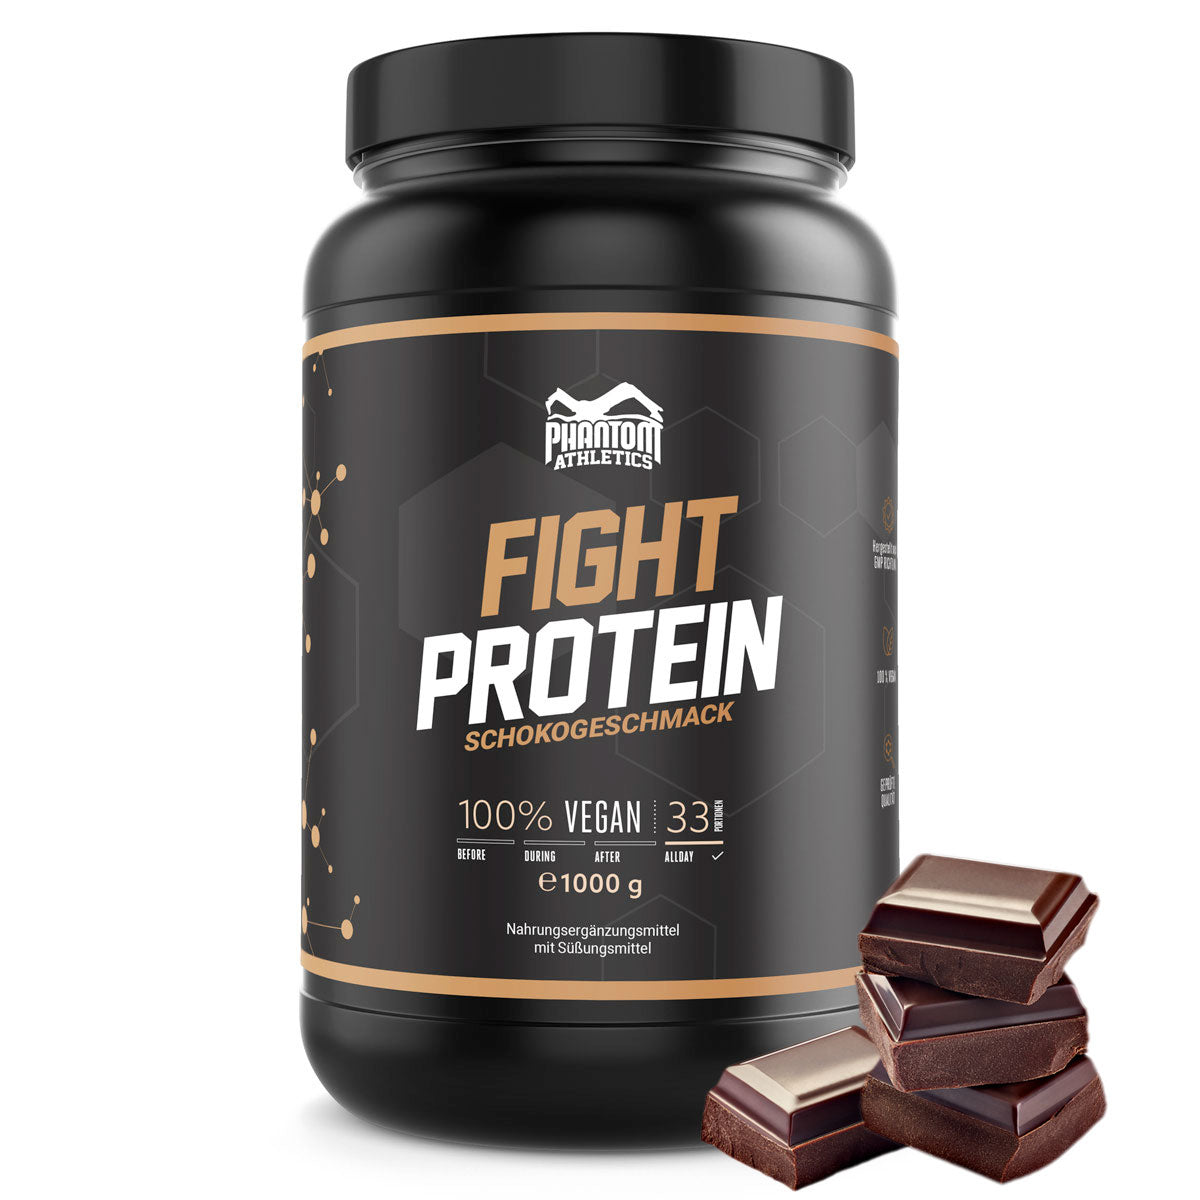 Phantom FIGHT protein for martial artists with a delicious chocolate taste.